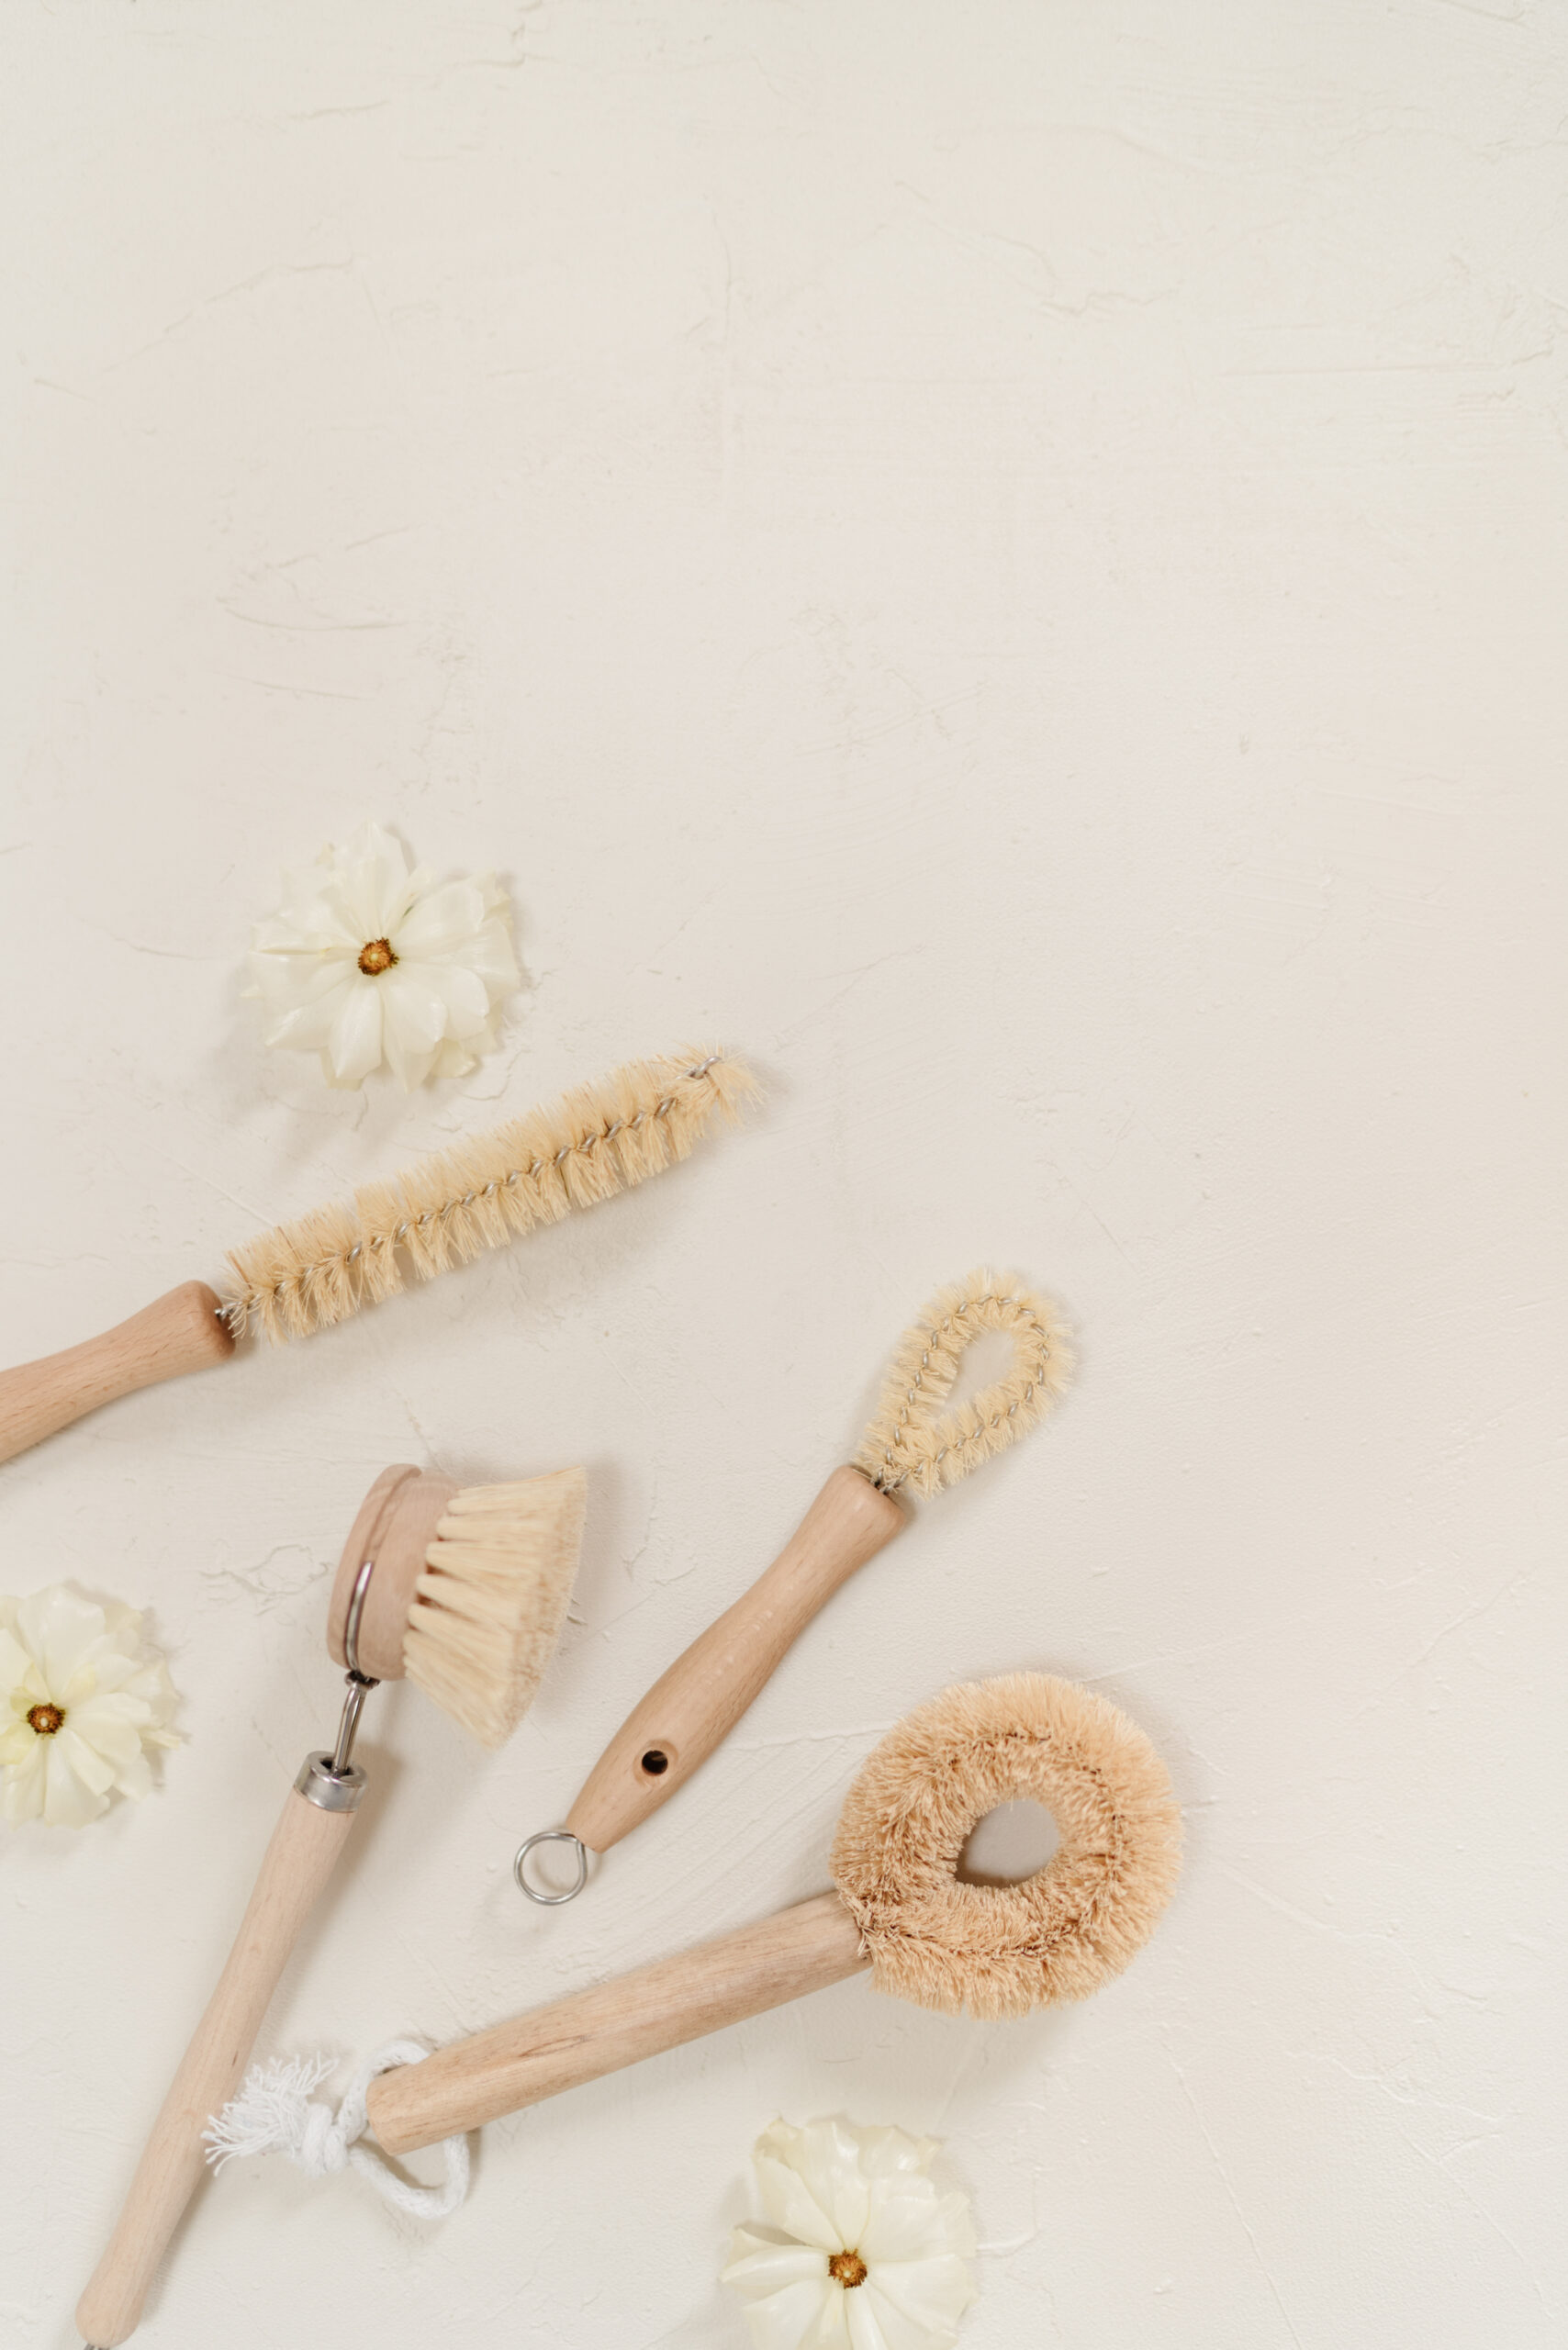 cleaning brushes and supplies with white flowers around them for small business owners spring cleaning